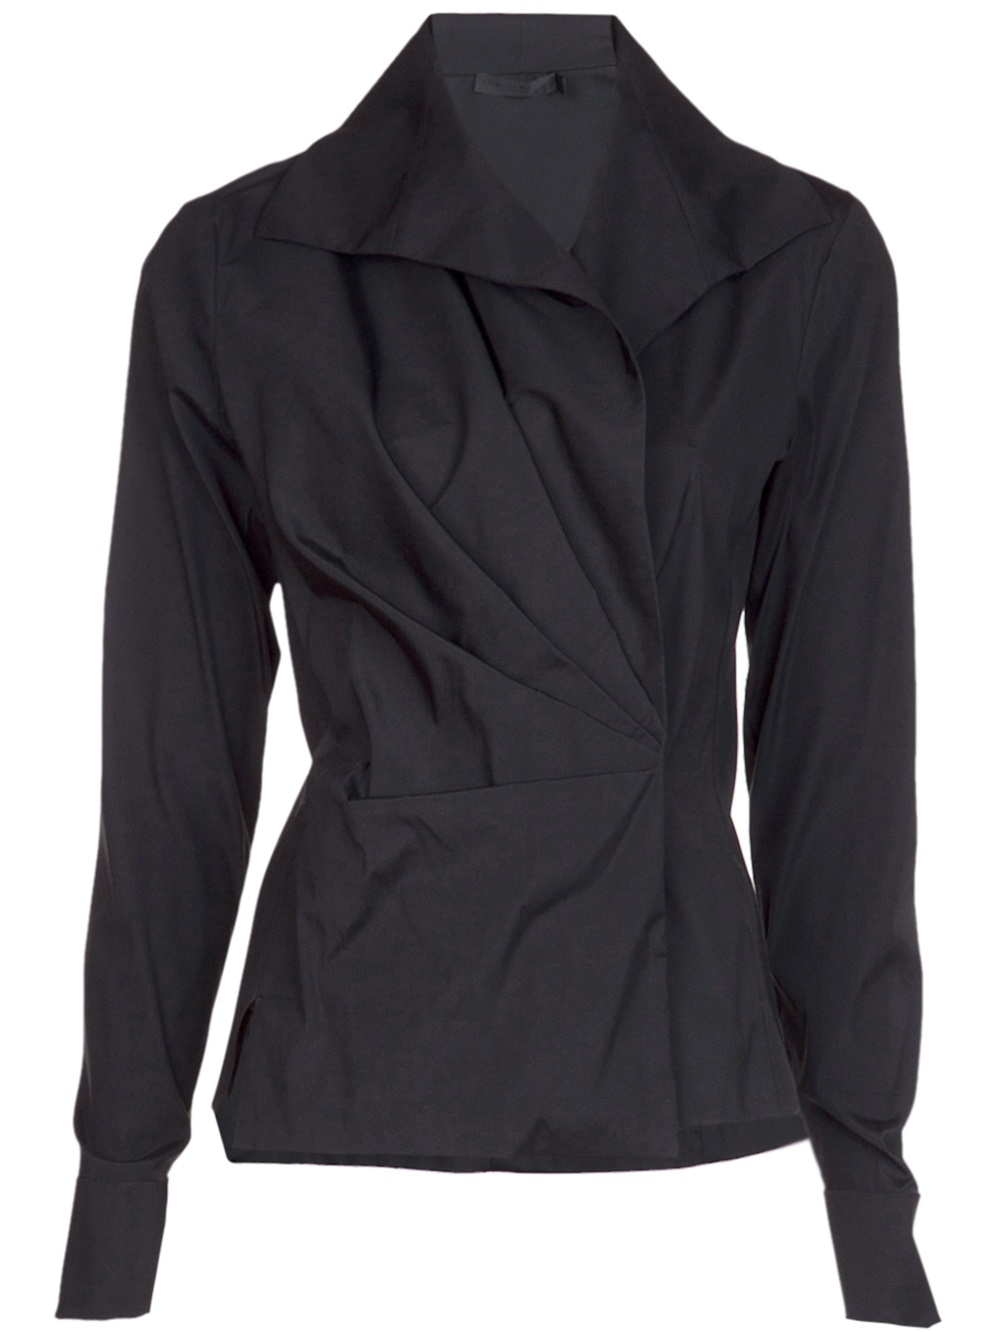 Lyst - Donna Karan Fitted Wrap Shirt in Black